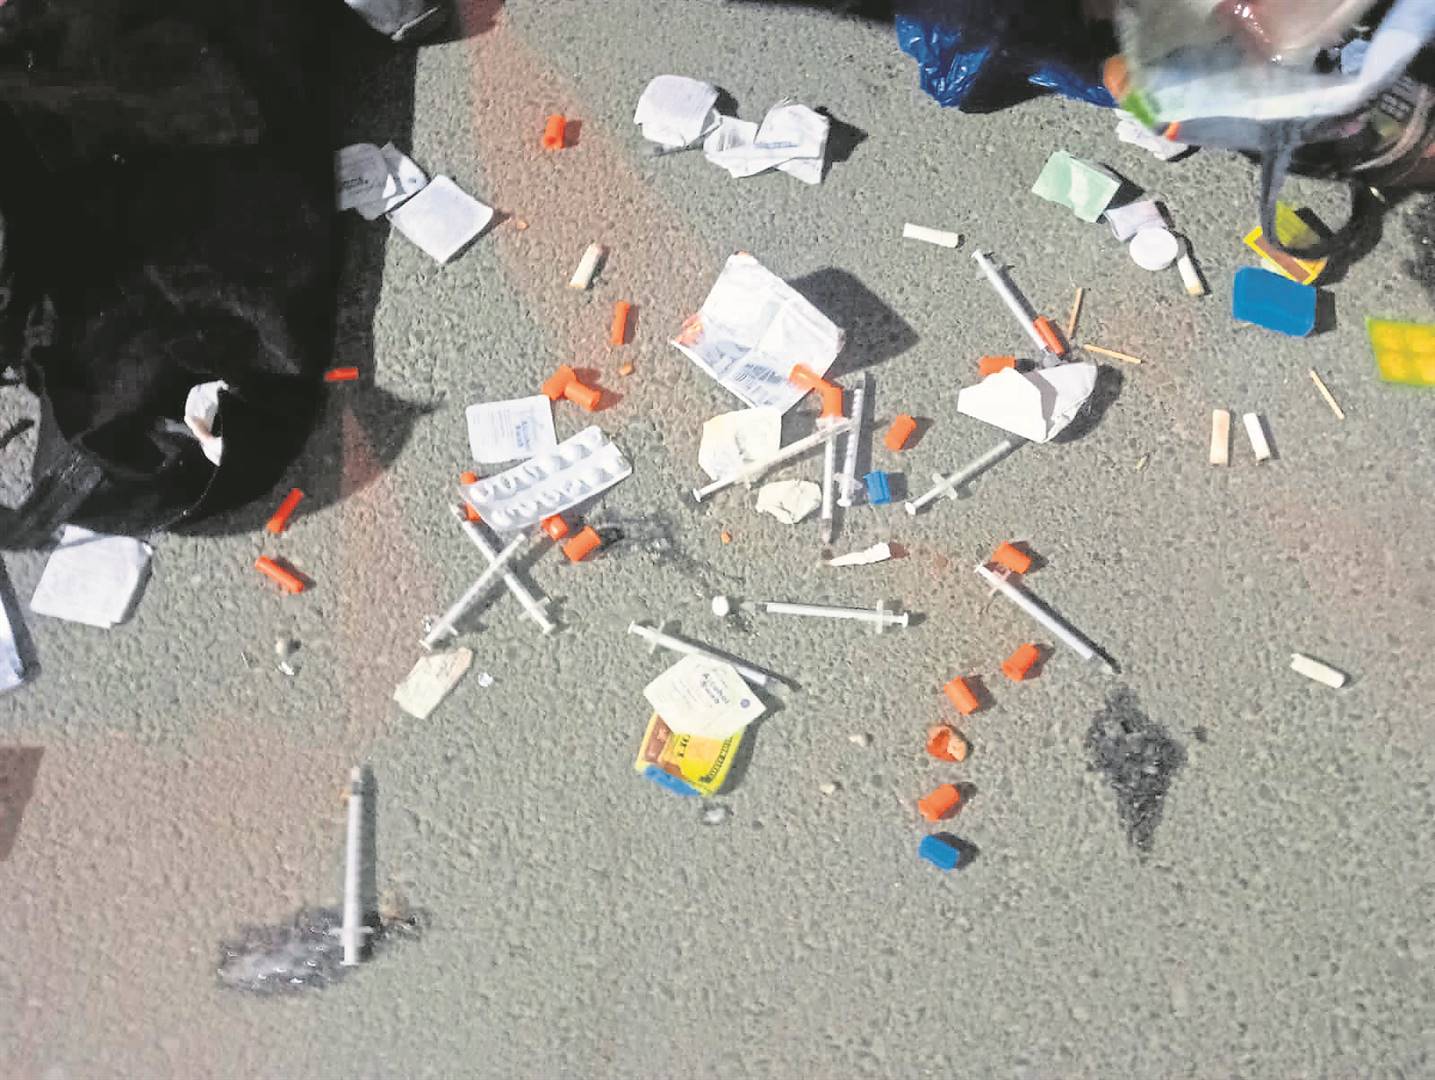 Discarded needles in Wynberg.PHOTO: Supplied